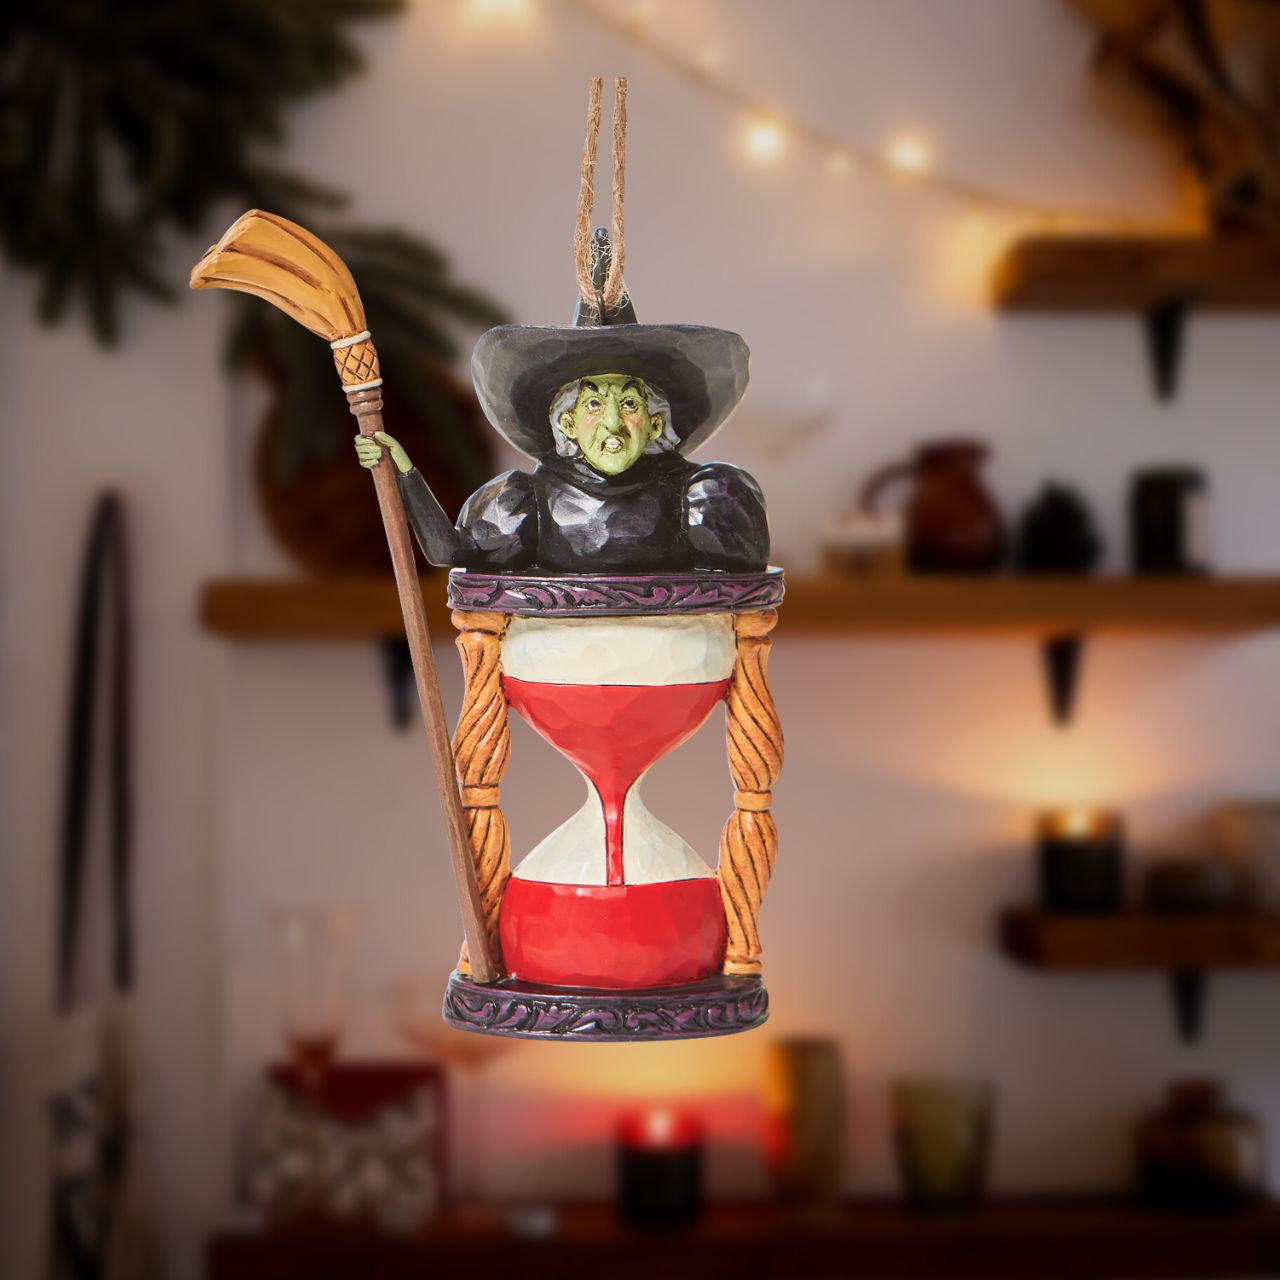 Jim Shore Wicked Witch with Hourglass Hanging Ornament  Someone looks unhappy in this hourglass ornament. As the sands of time fall, the Wicked Witch frowns knowing it's only a matter of time until good wins the day. Place this green-faced miscreant into your tree and watch her moments before melting.